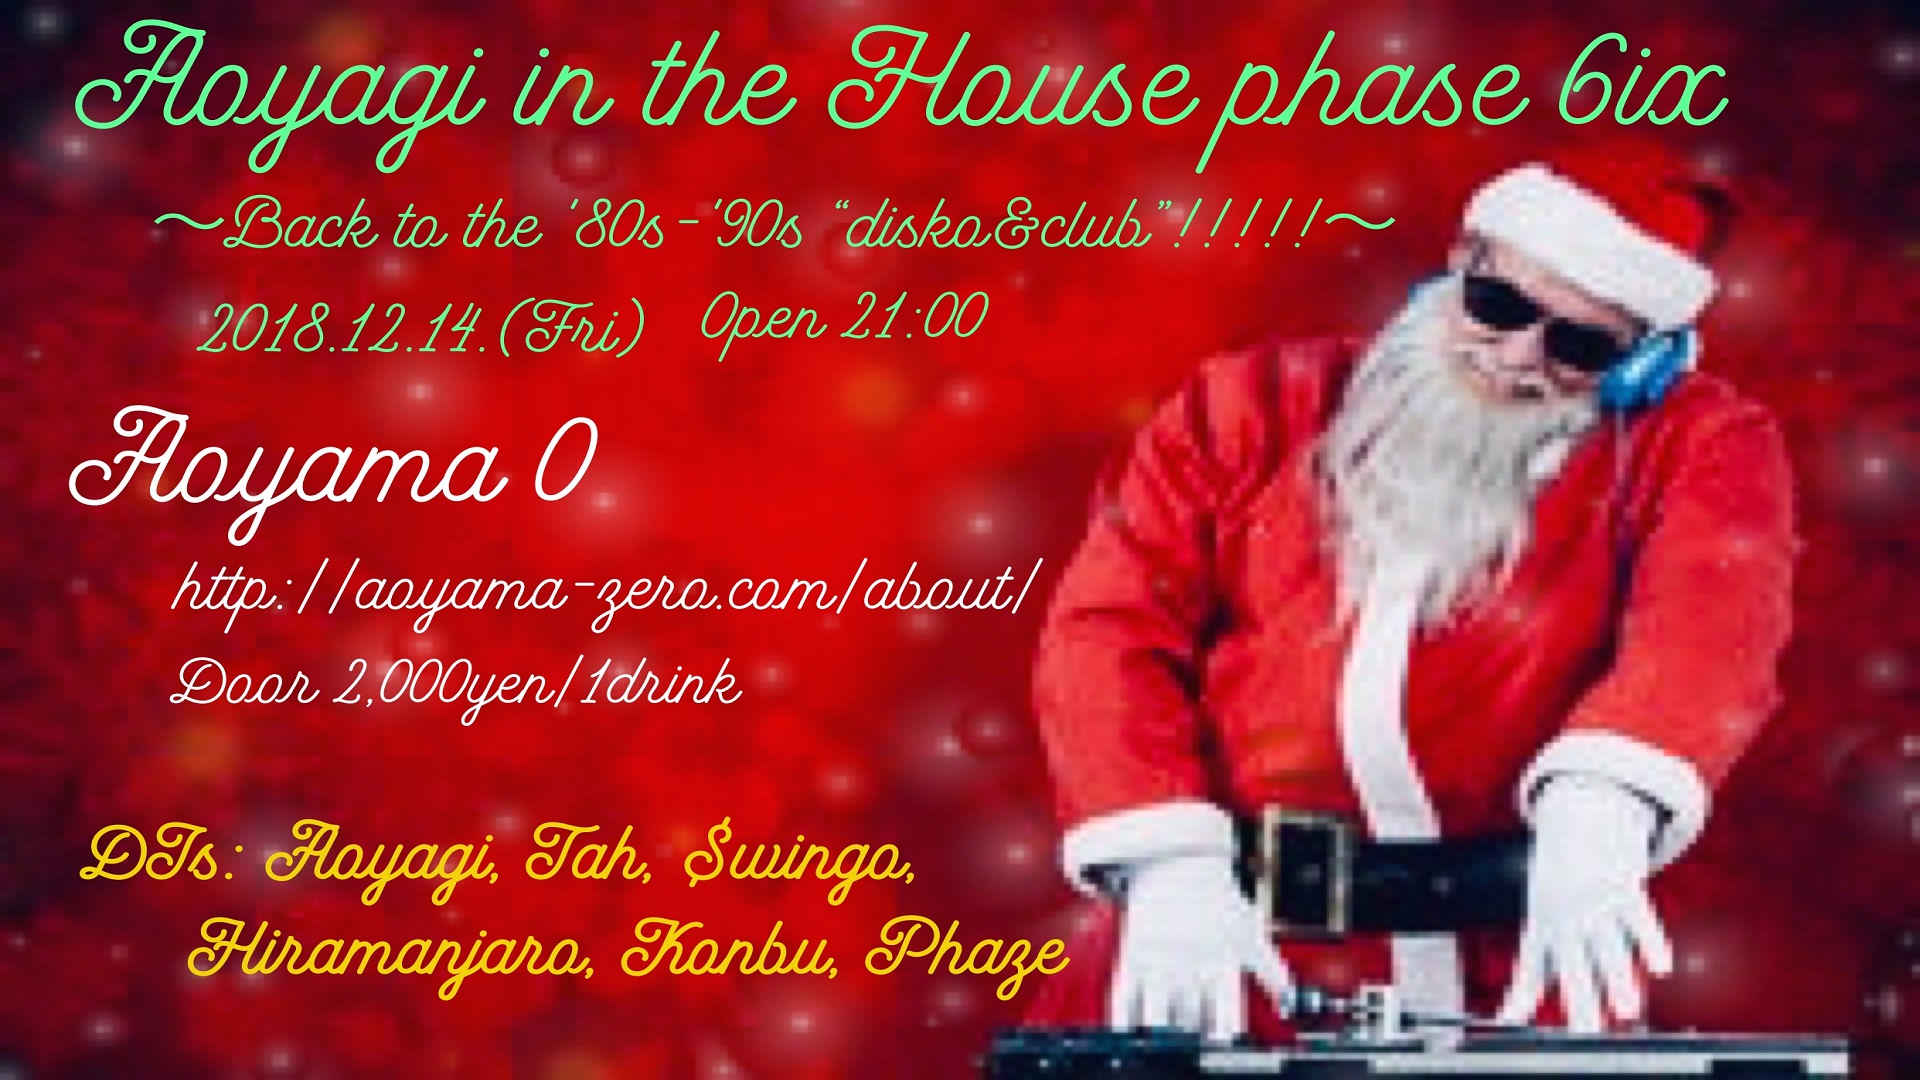 Aoyagi in the House Phase 6ix ～Back to the ’80s-’90s “disko&club”!!!!!～